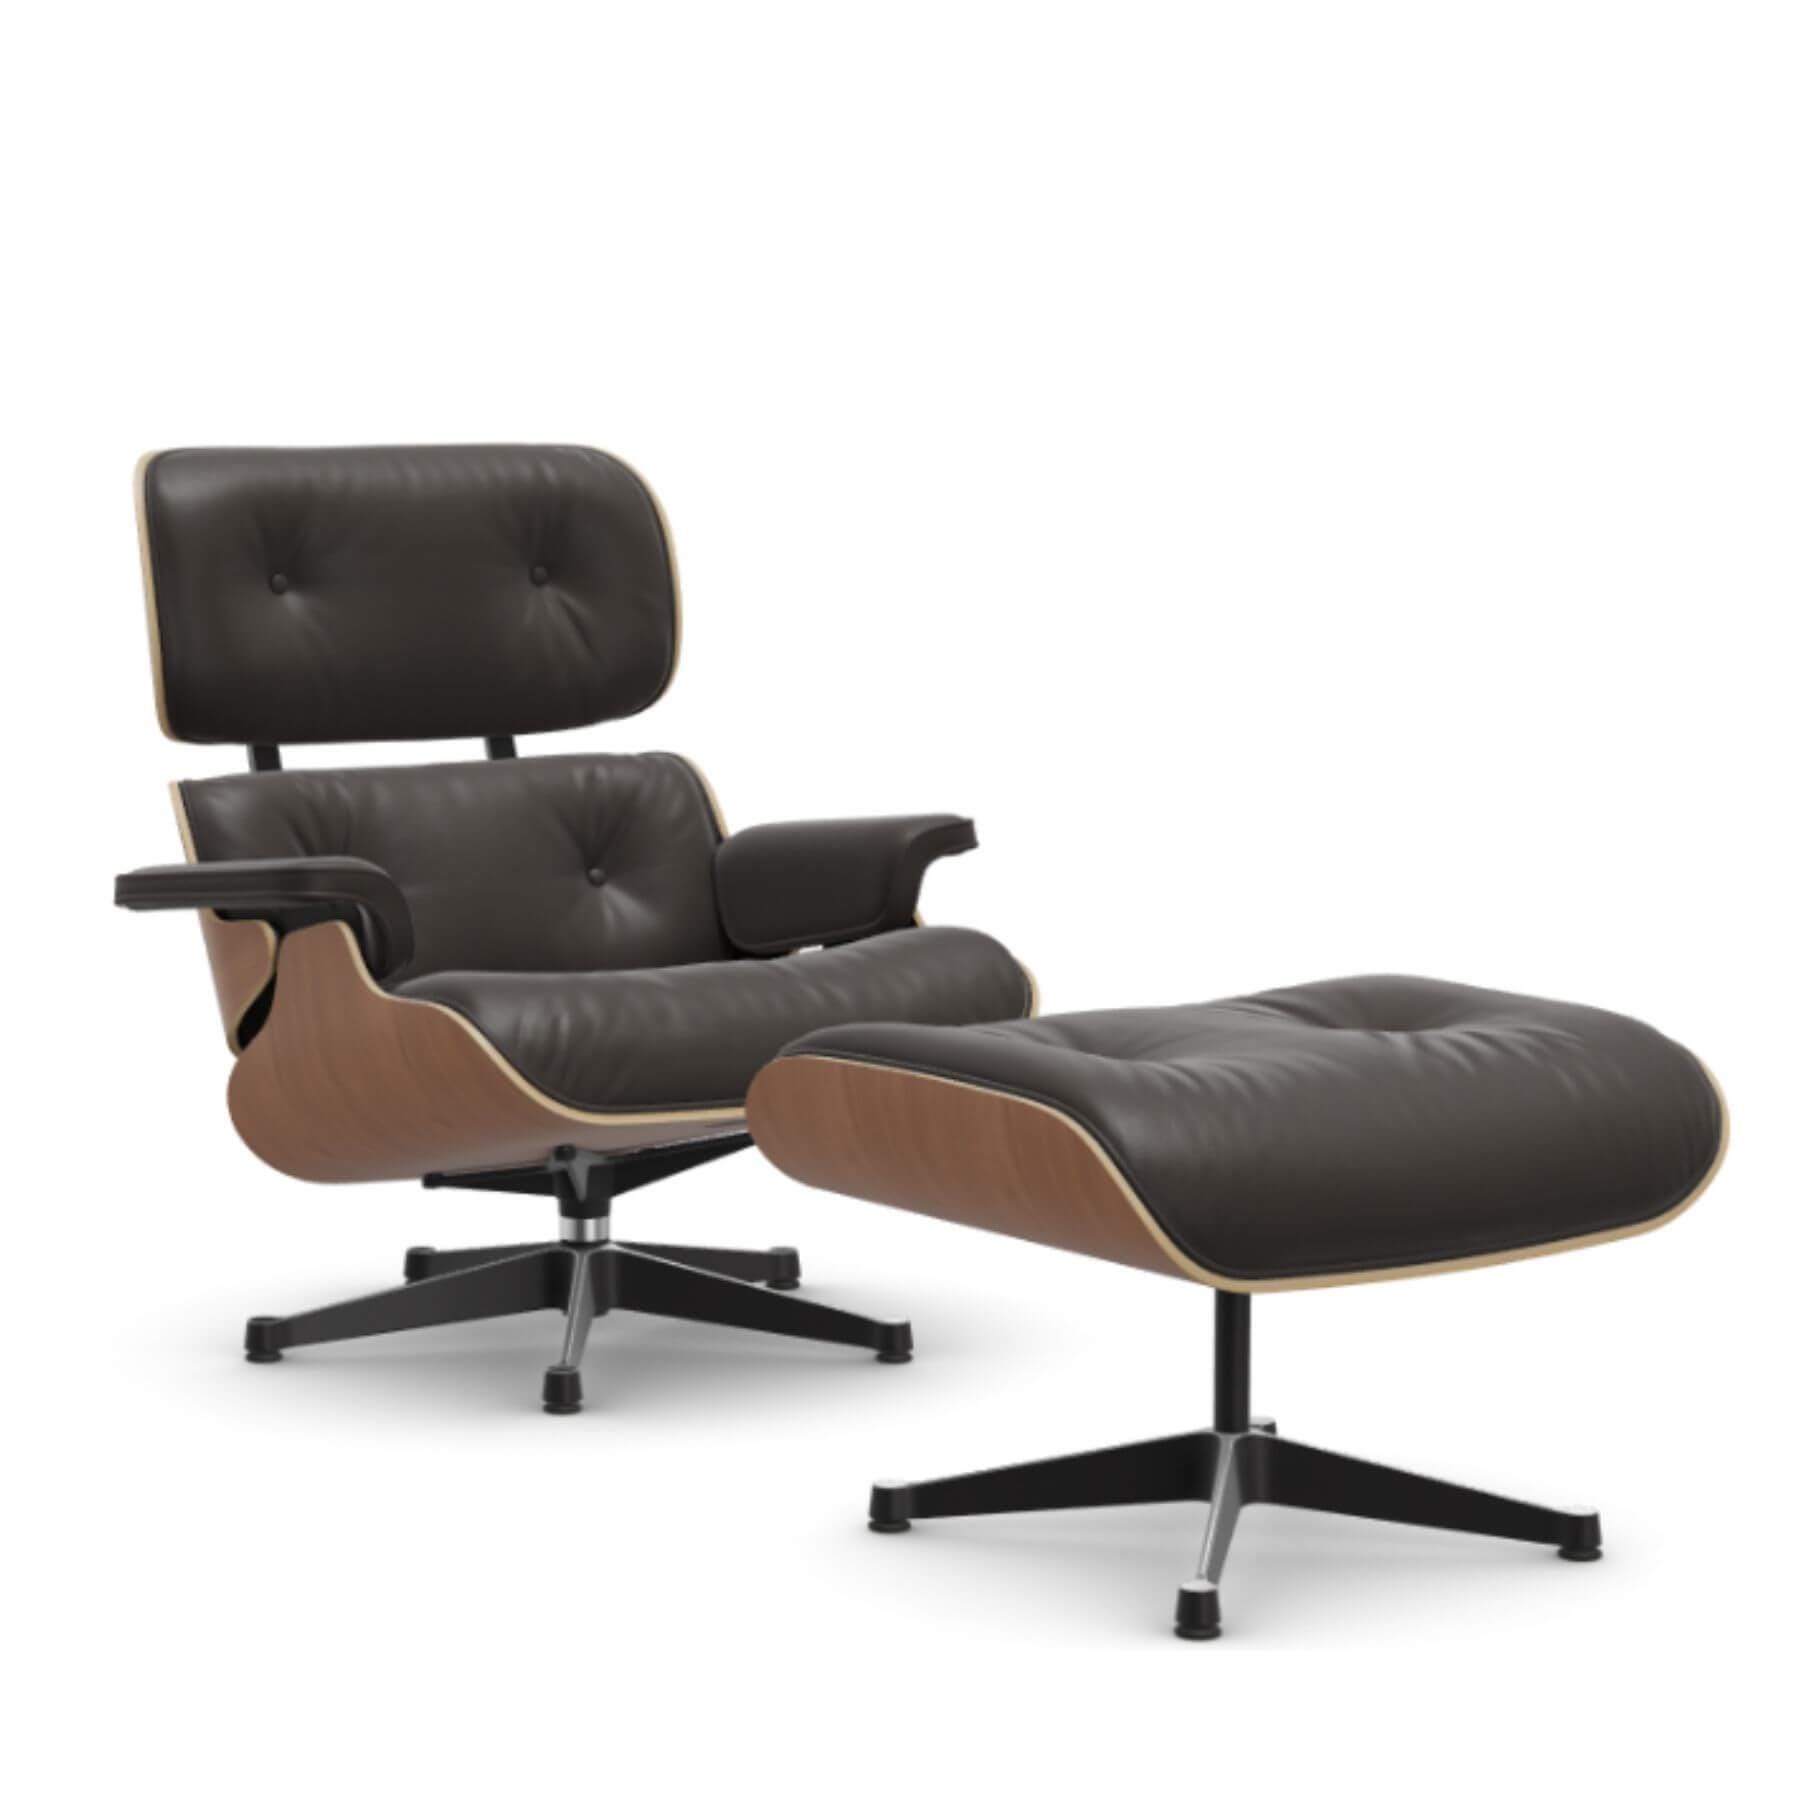 Vitra Eames Classic Lounge Chair American Cherry Leather Natural F Chocolate Polished Black With Ottoman Light Wood Designer Furniture From Hollow